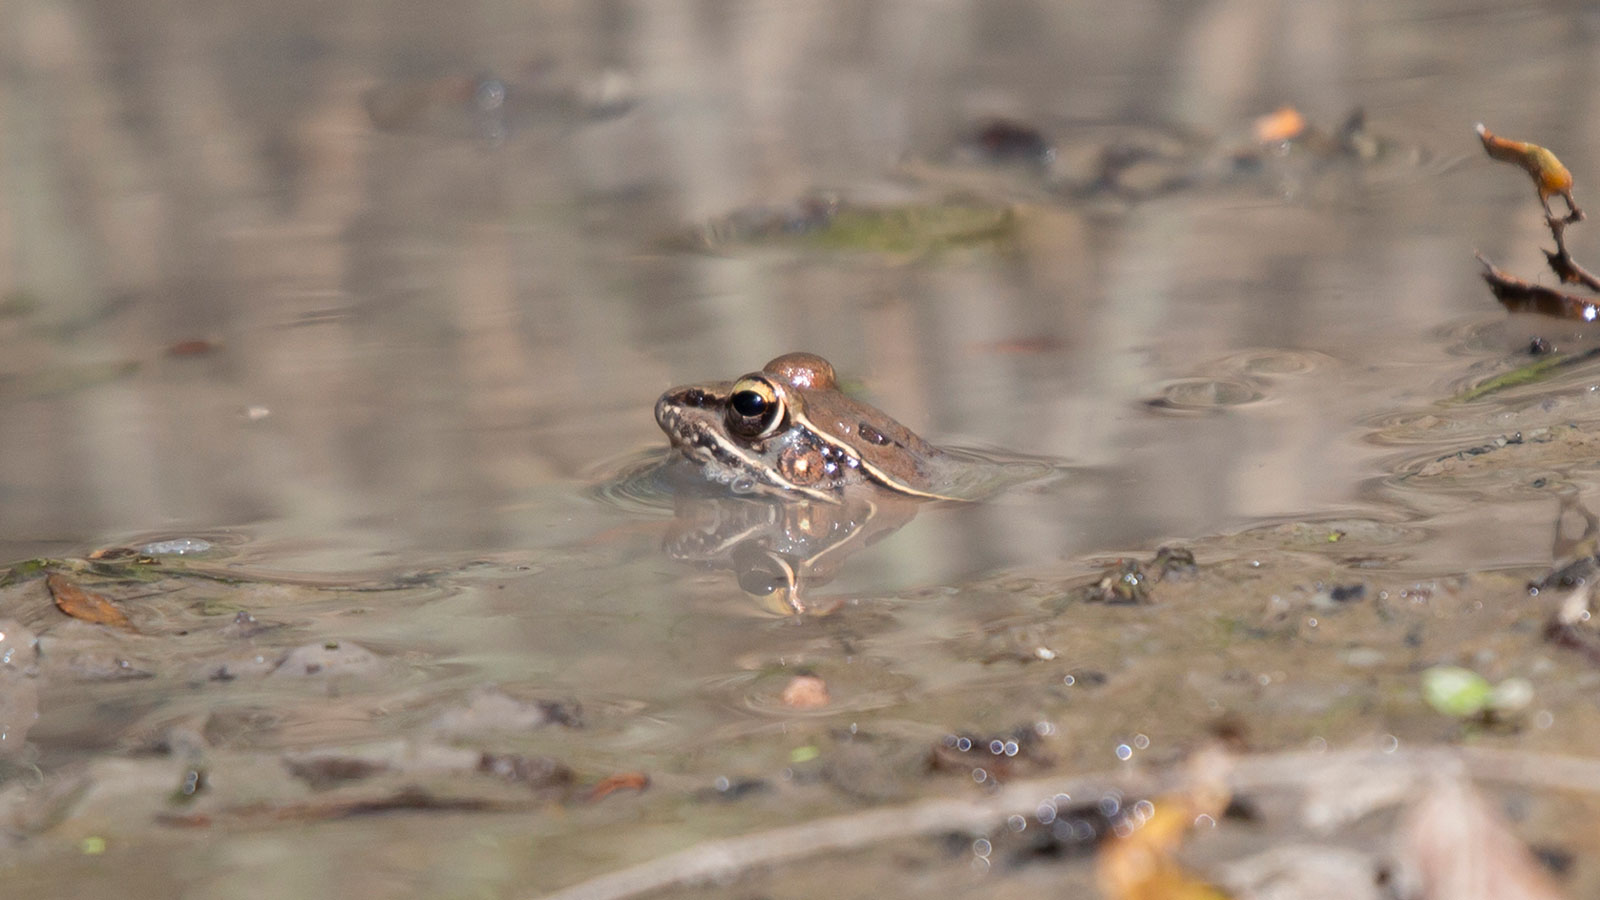 Southern leopard frog mostly submerged in a mud puddle